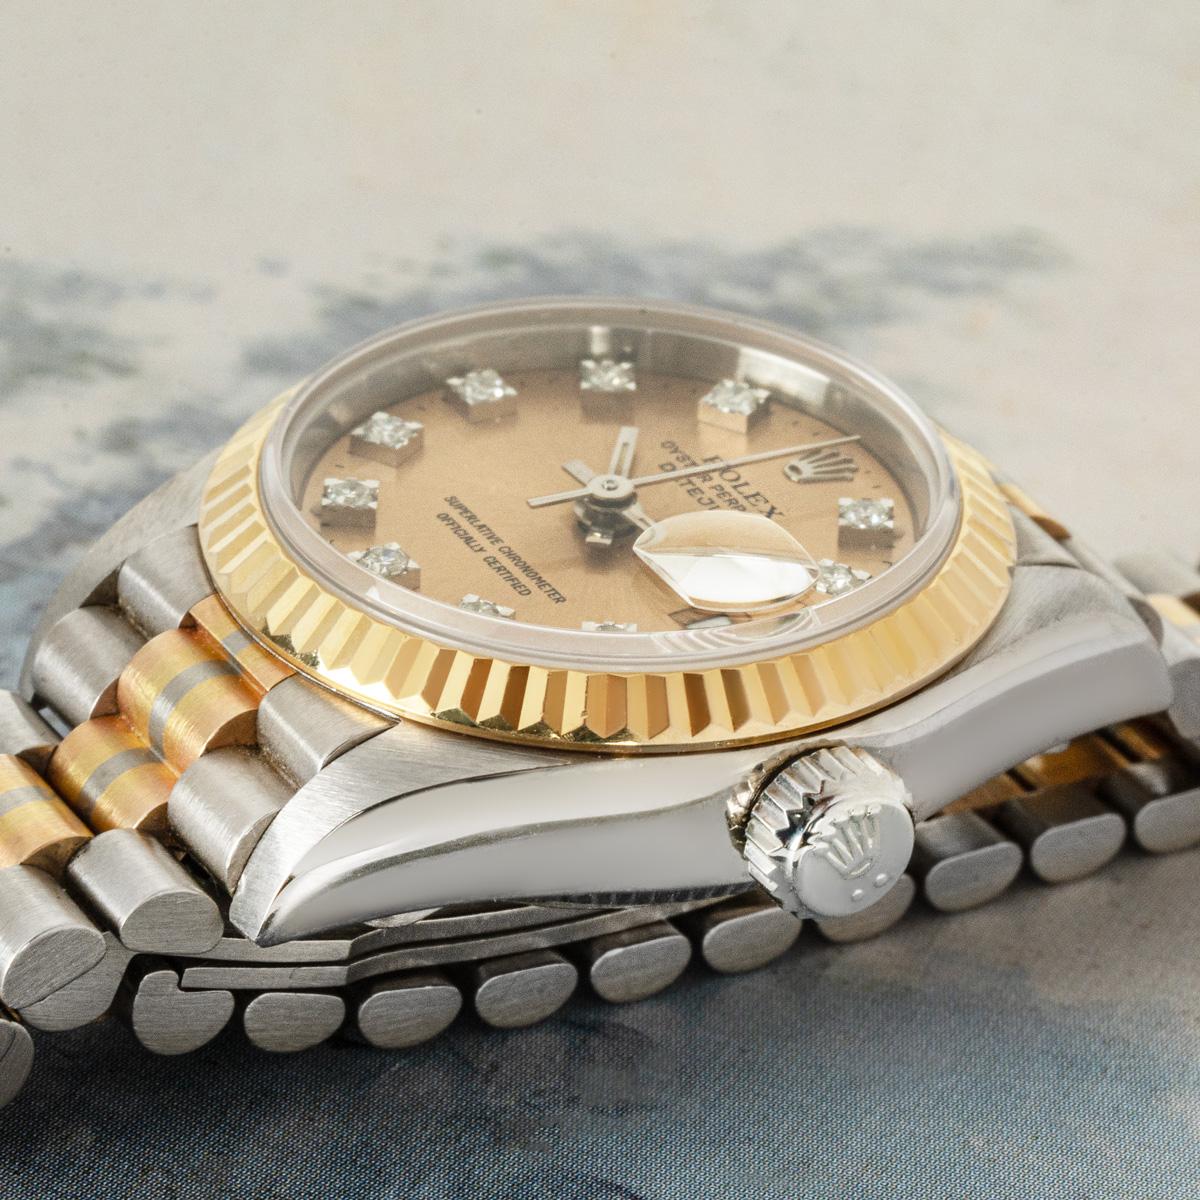 A 26mm Datejust in tri-gold by Rolex. Featuring a champagne dial with diamond set hour markers complemented by a fixed yellow gold fluted bezel.

Fitted with sapphire crystal and a self-winding automatic movement, this timepiece is brought together